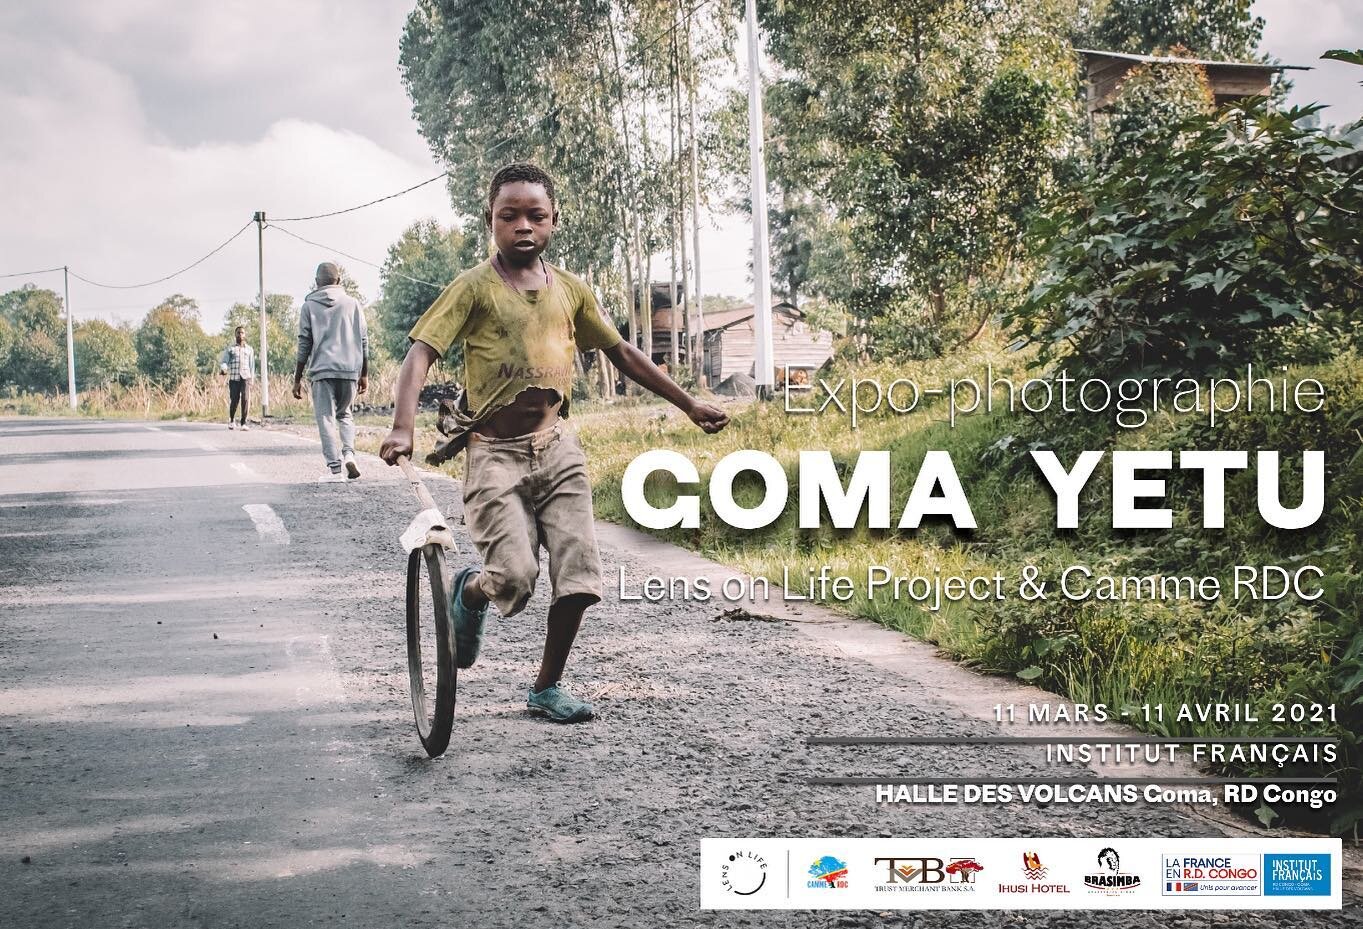 If you are in Goma please join us next Thursday for the opening of our month-long exhibit @if_goma. Goma Yetu (&ldquo;Our Goma&rdquo; in Swahili) presents a series of photographs taken over the past three years by @lensonlifeproject students on the s